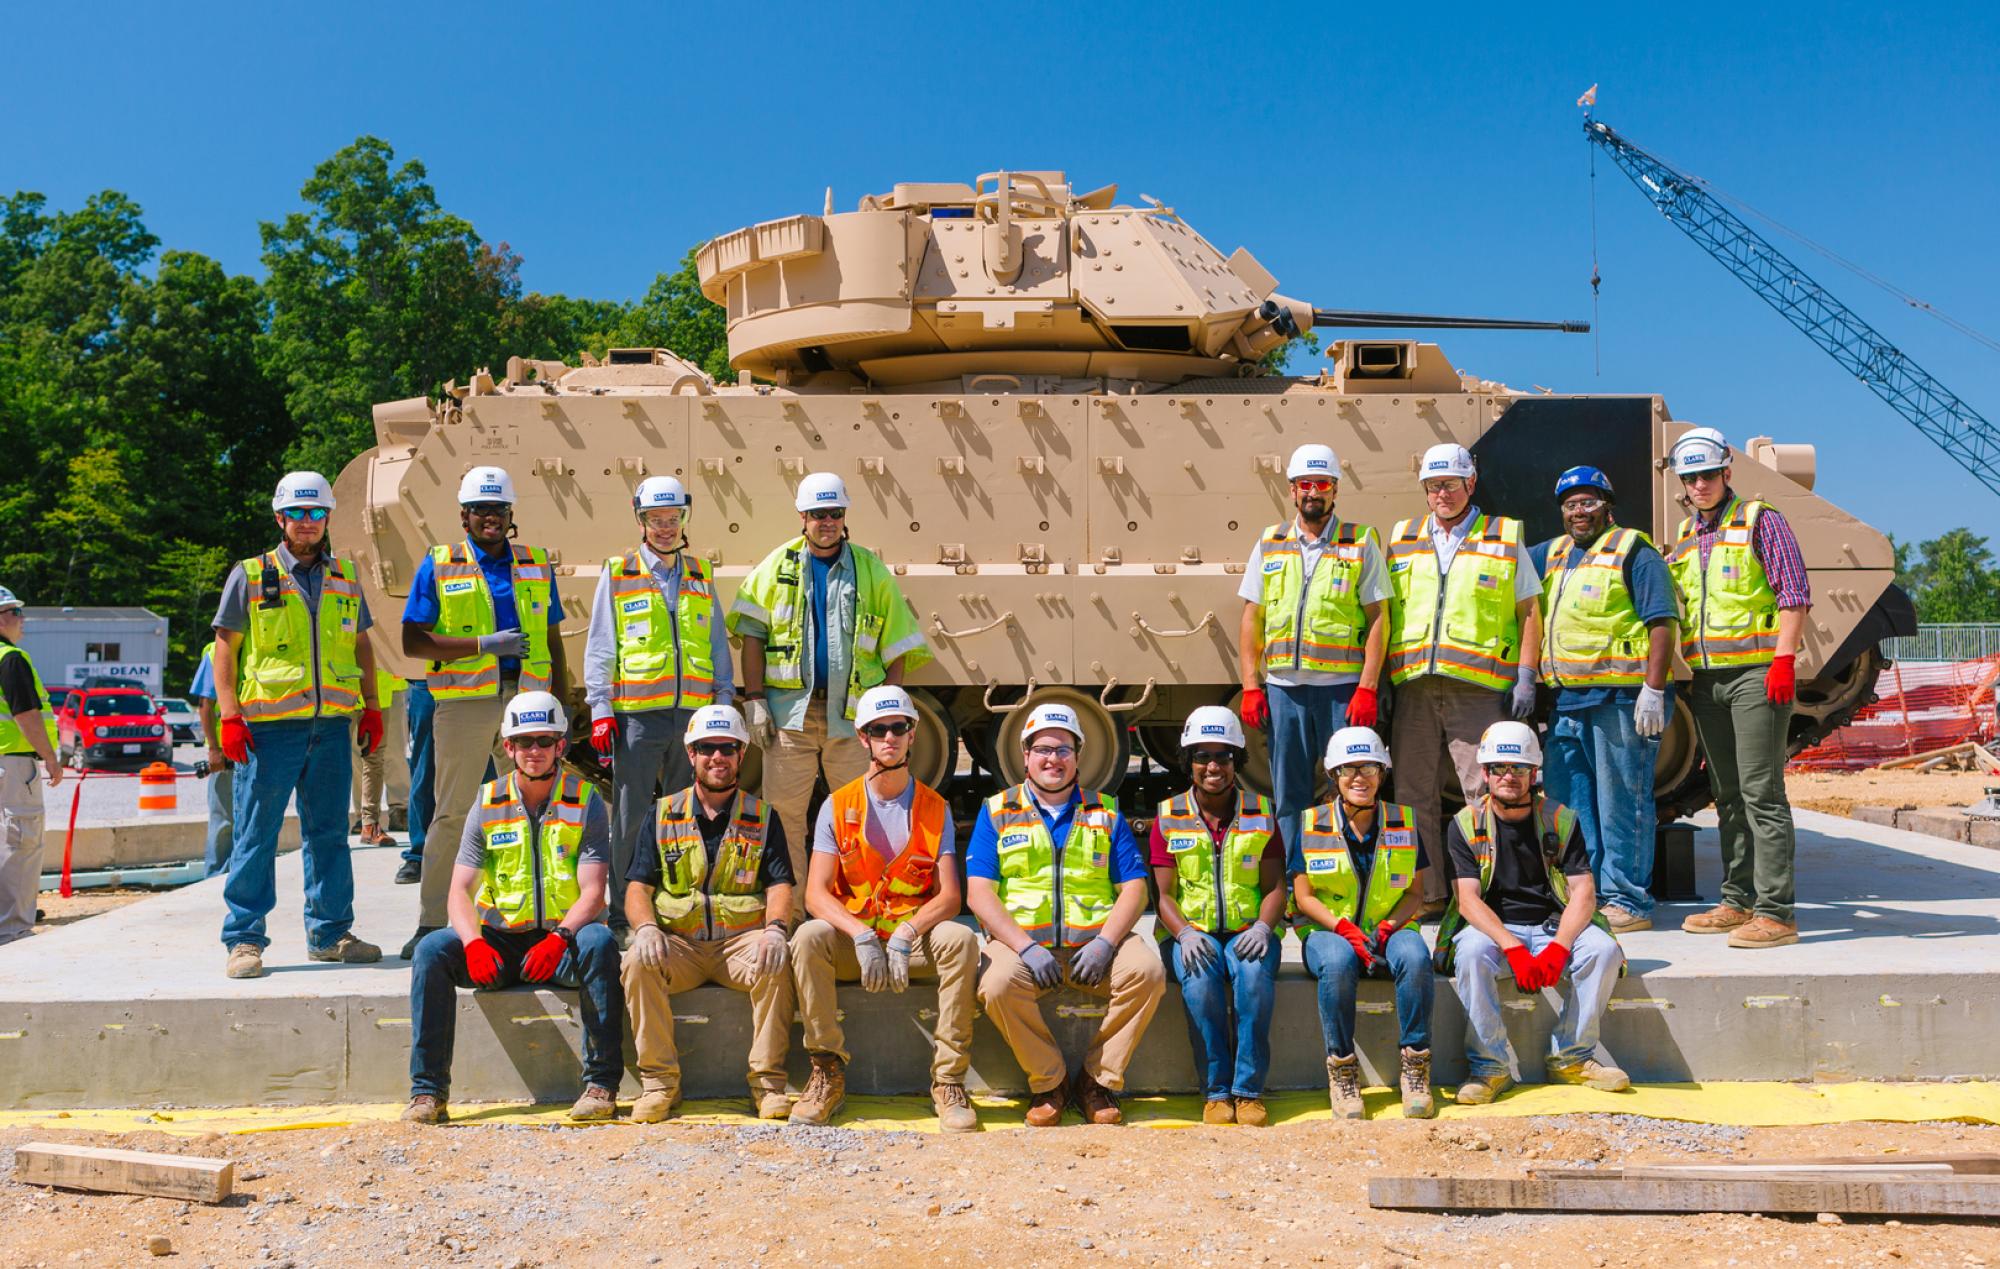 Clark employees in PPE pose in front of a sand-colored armored tank